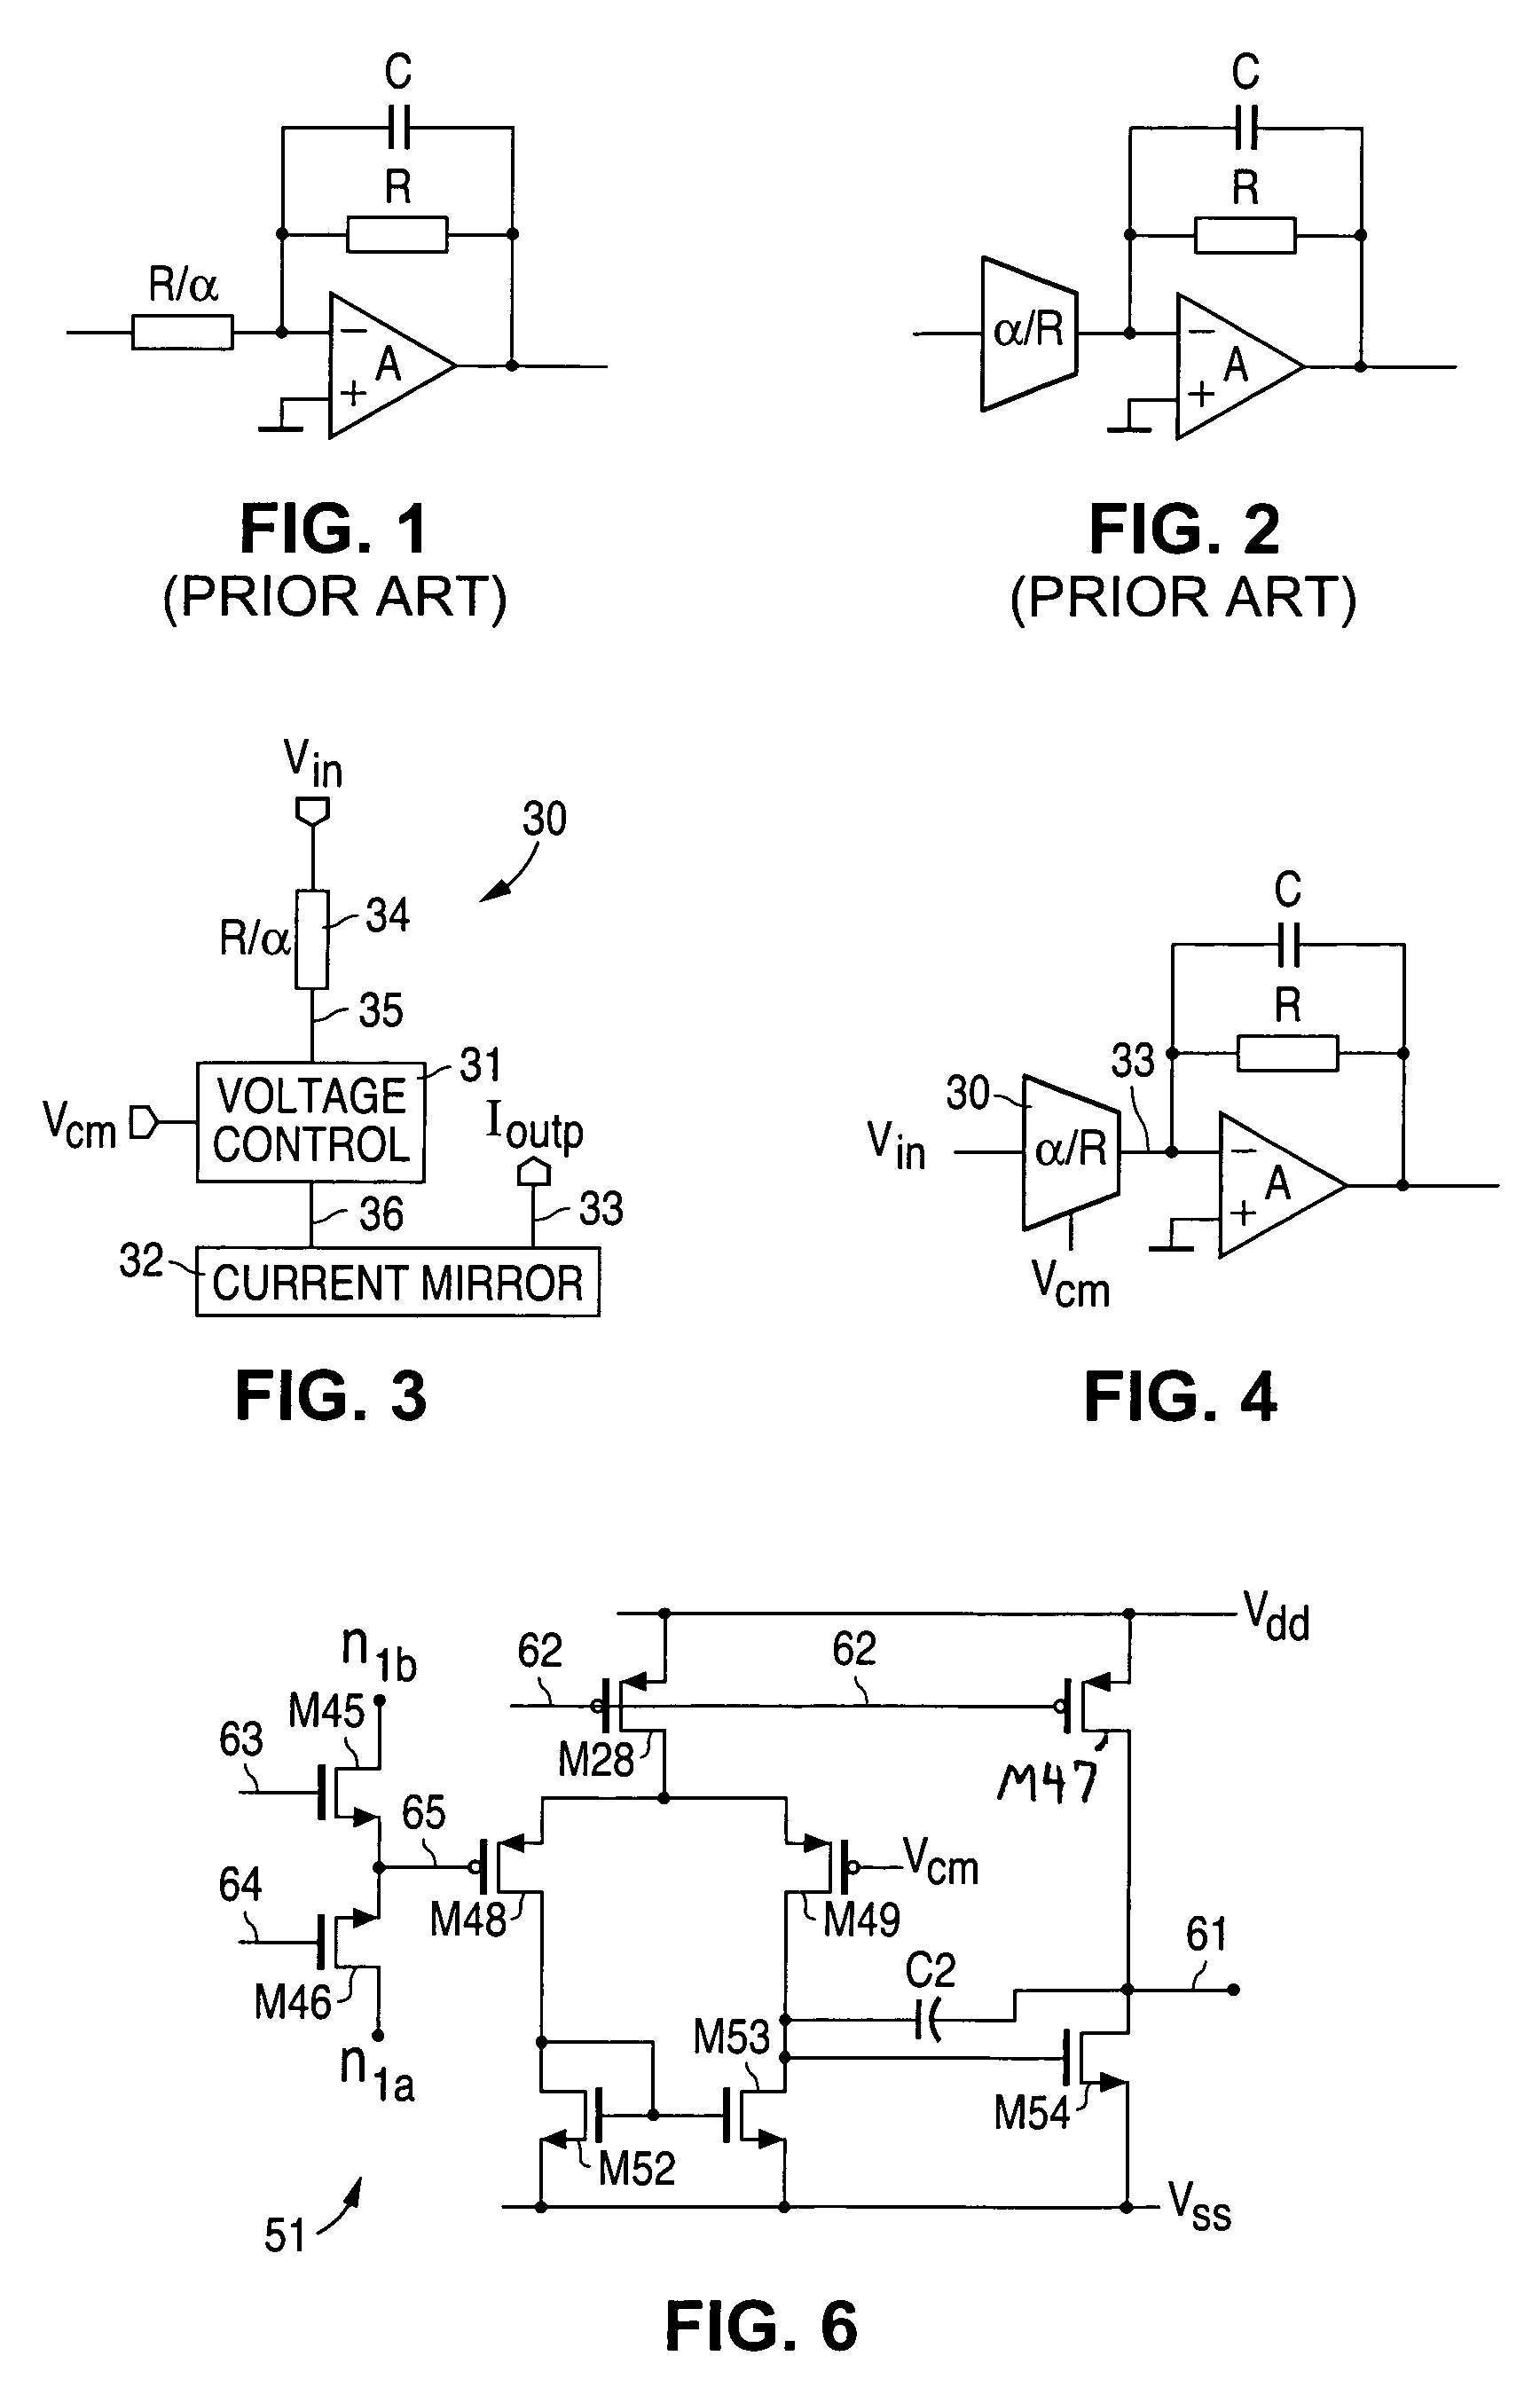 Low-complexity active transconductance circuit